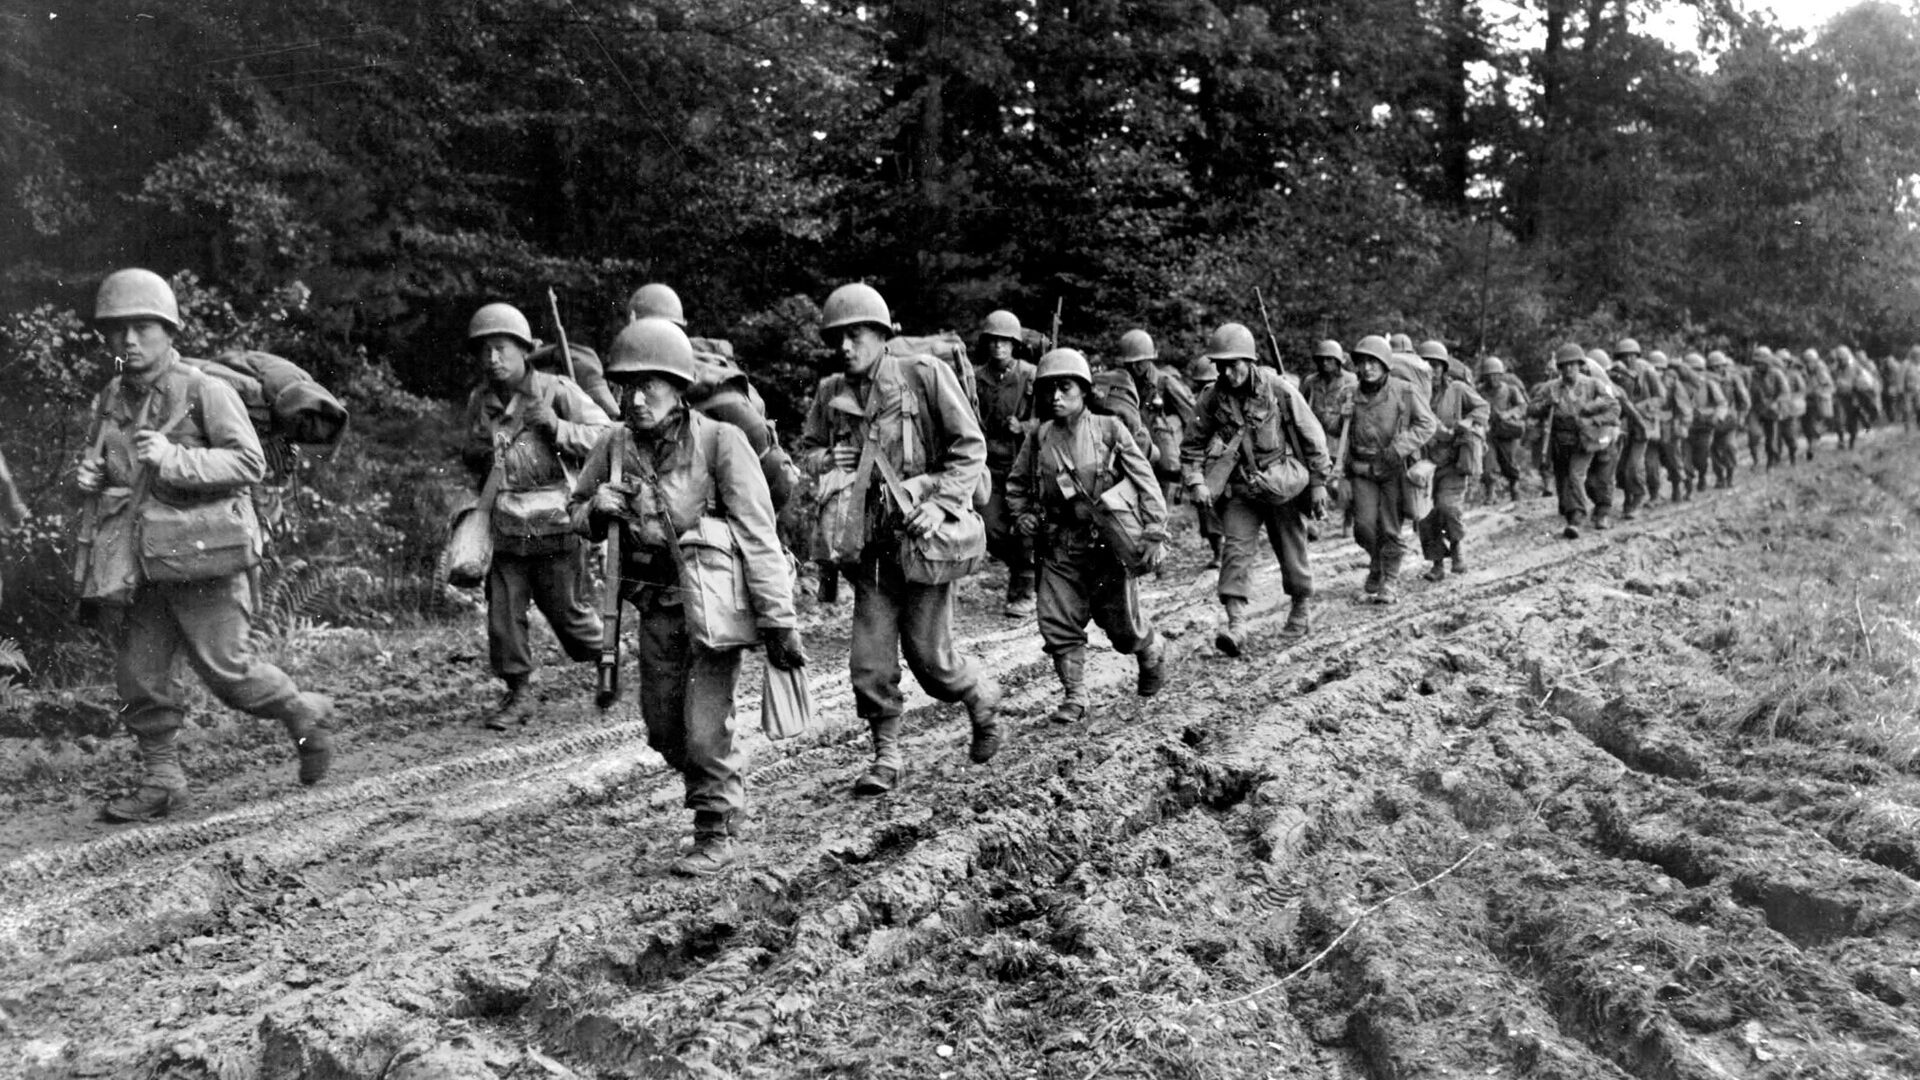 Slogging their way along a road in the Chambois sector of the Vosges Mountains in October 1944, soldiers of the Japanese-American 442nd Regimental Combat Team advance toward the front lines during their heroic effort to rescue the Lost Battalion of the 36th Infantry Division. 